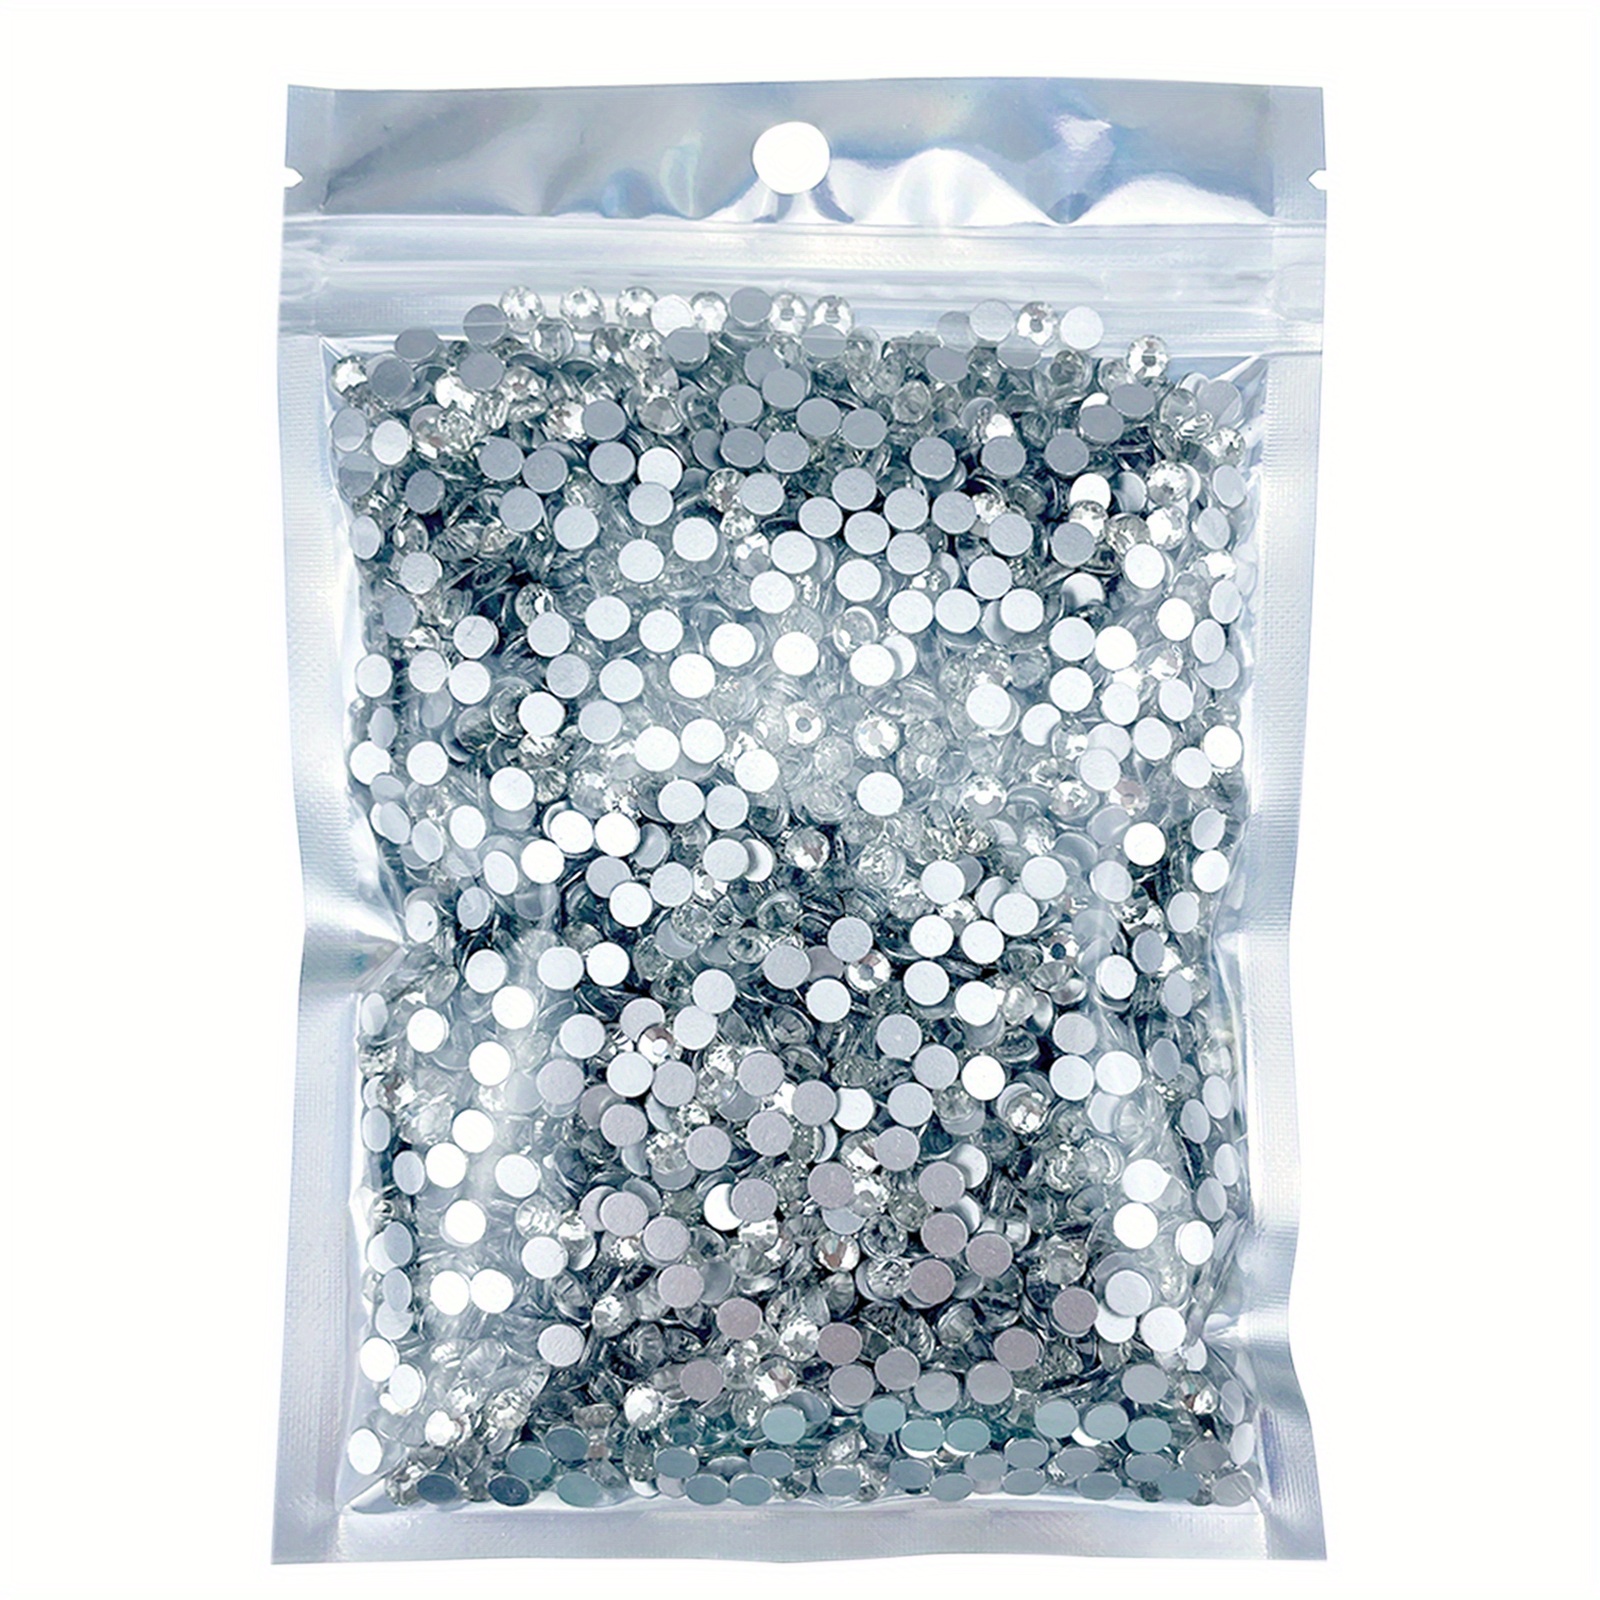 4320Pcs SS10 Flatback Rhinestones for Crafts Bulk Clear-Crystals White  Craft Gems Jewels Glass Diamonds Stone 3mm-Silver Gems for Nails Dance  Costumes